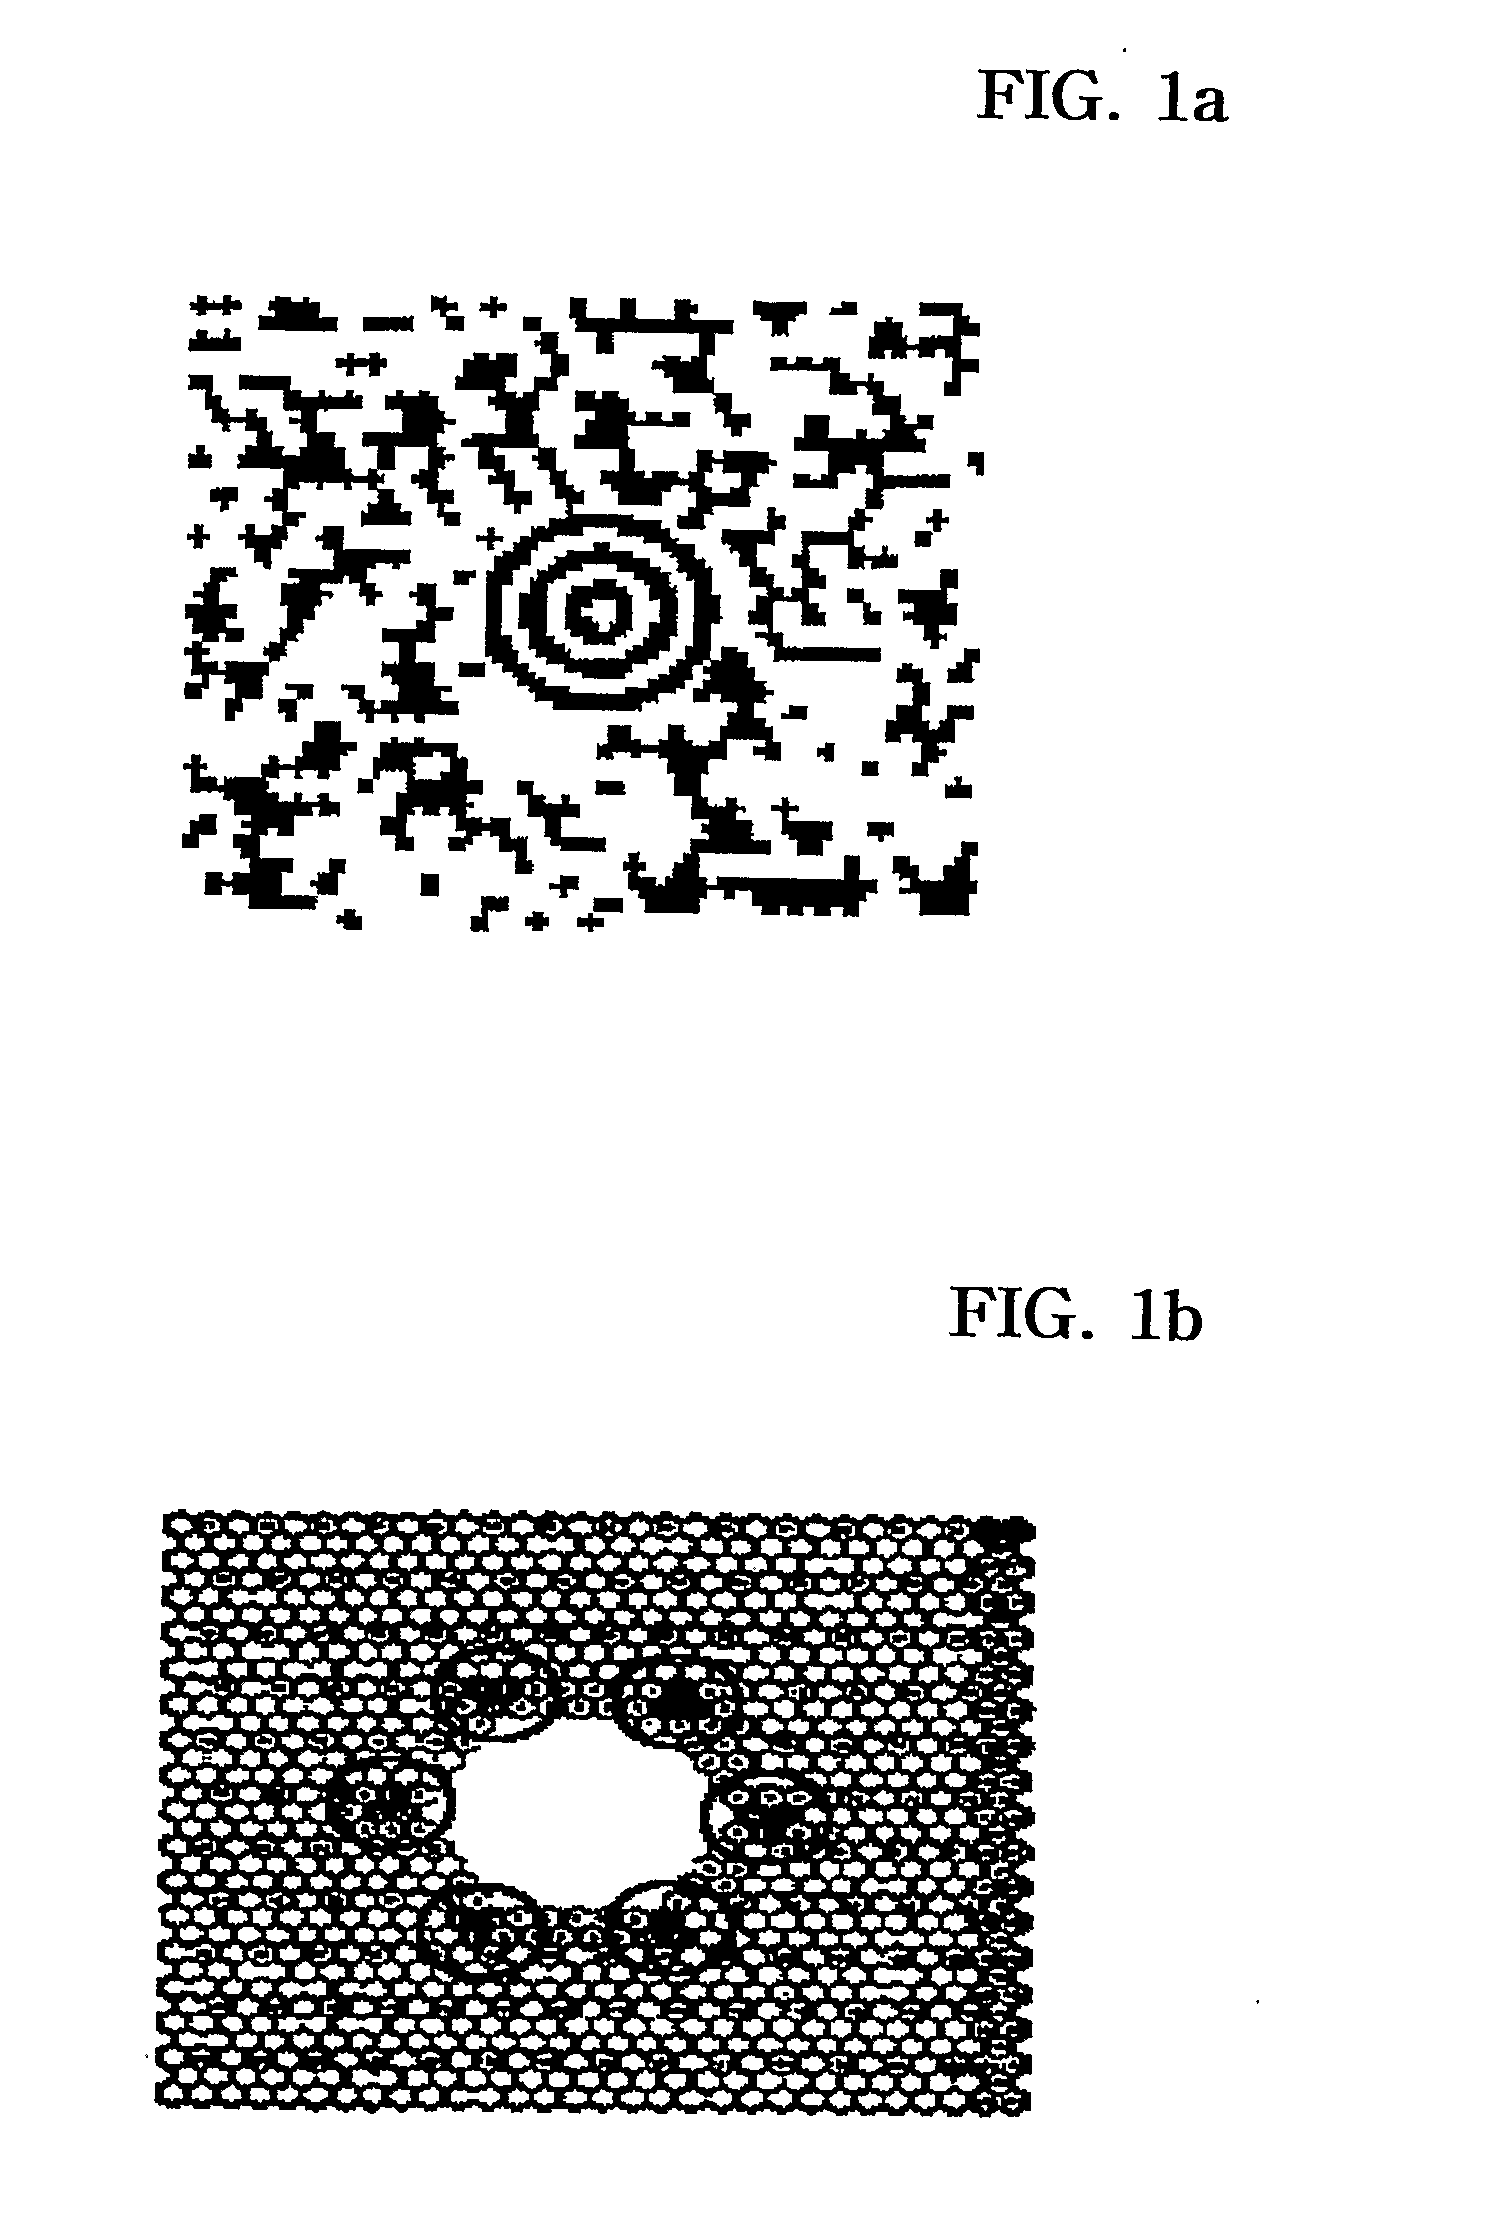 System and Method for Encoding and Decoding Large Capacity 2-Dimensional Color Bar Code Which Can Be Color-Corrected